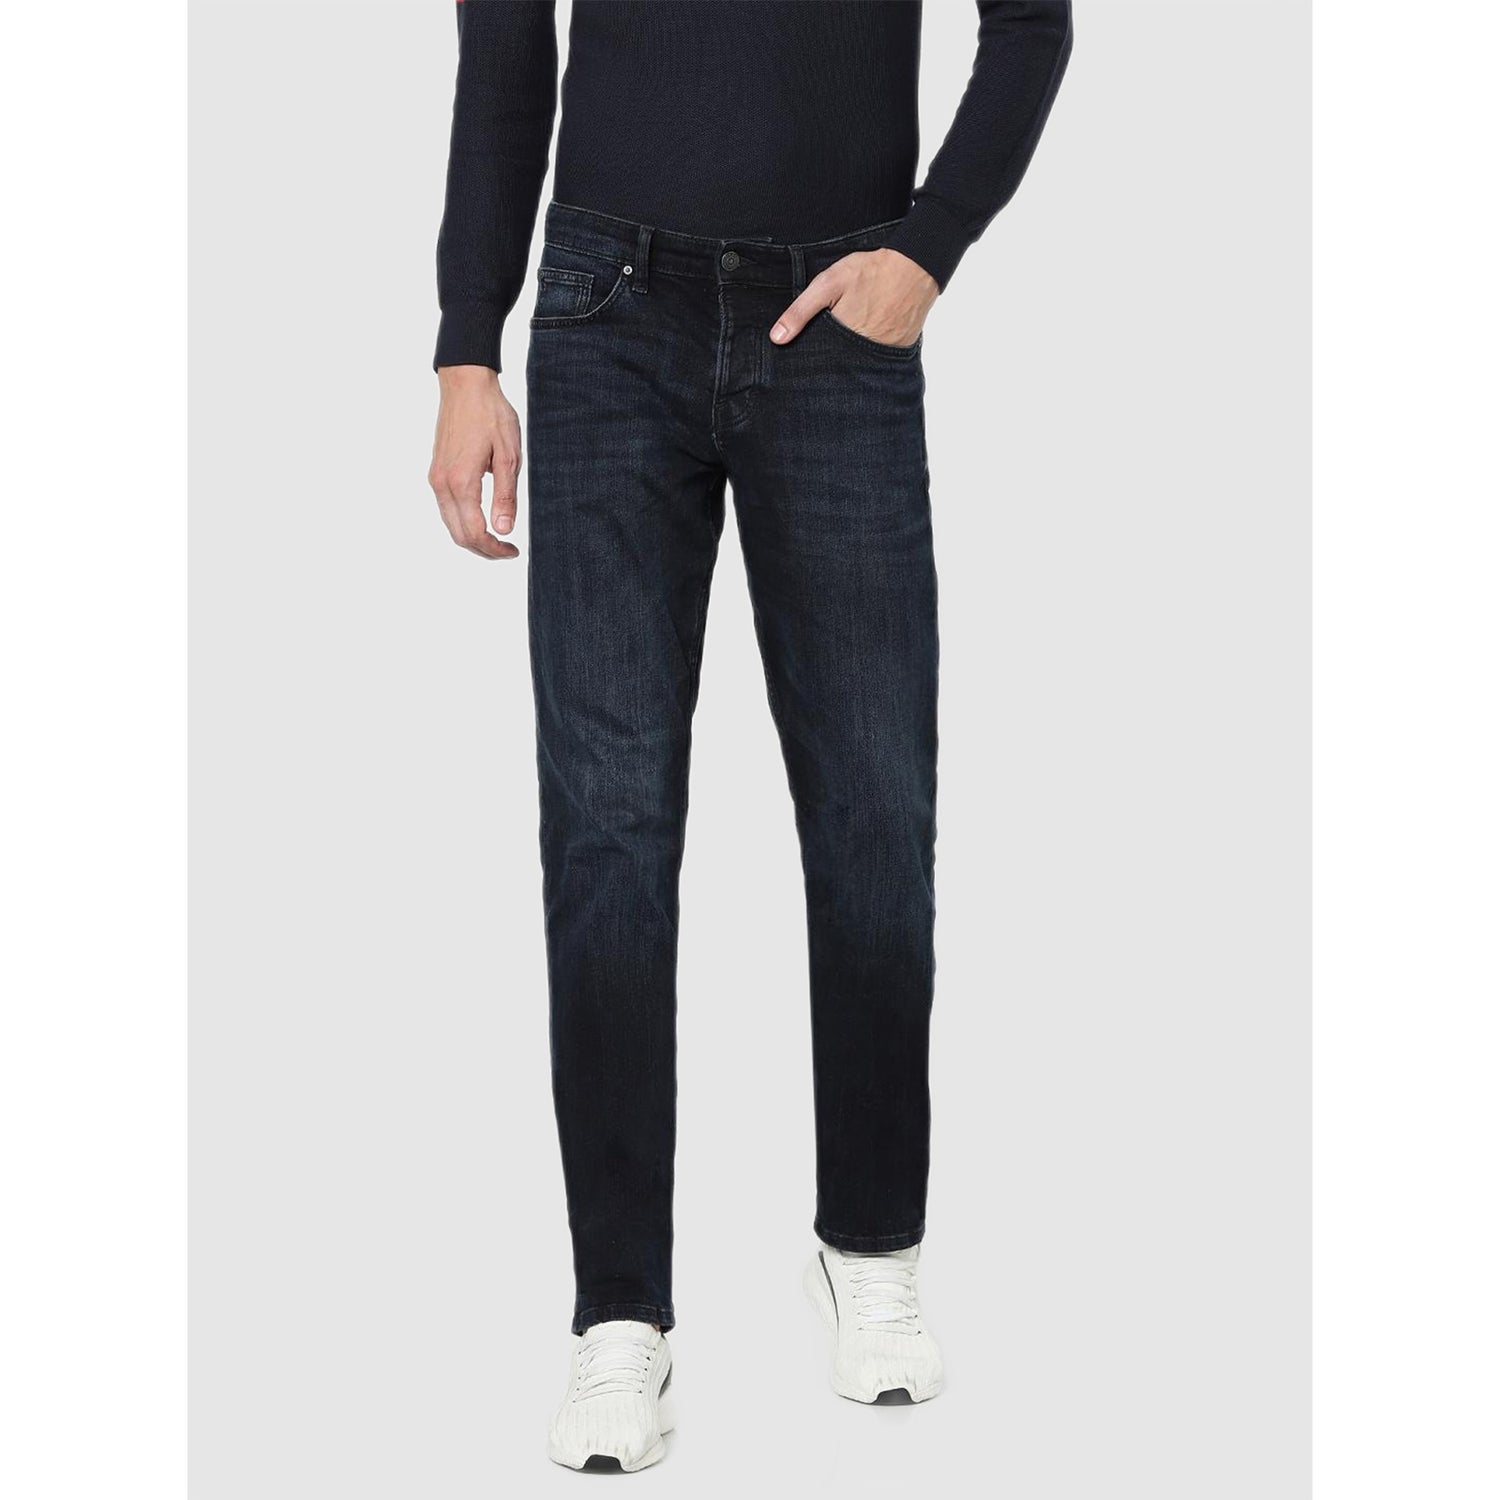 Navy Slim Fit Jeans (Various Sizes)